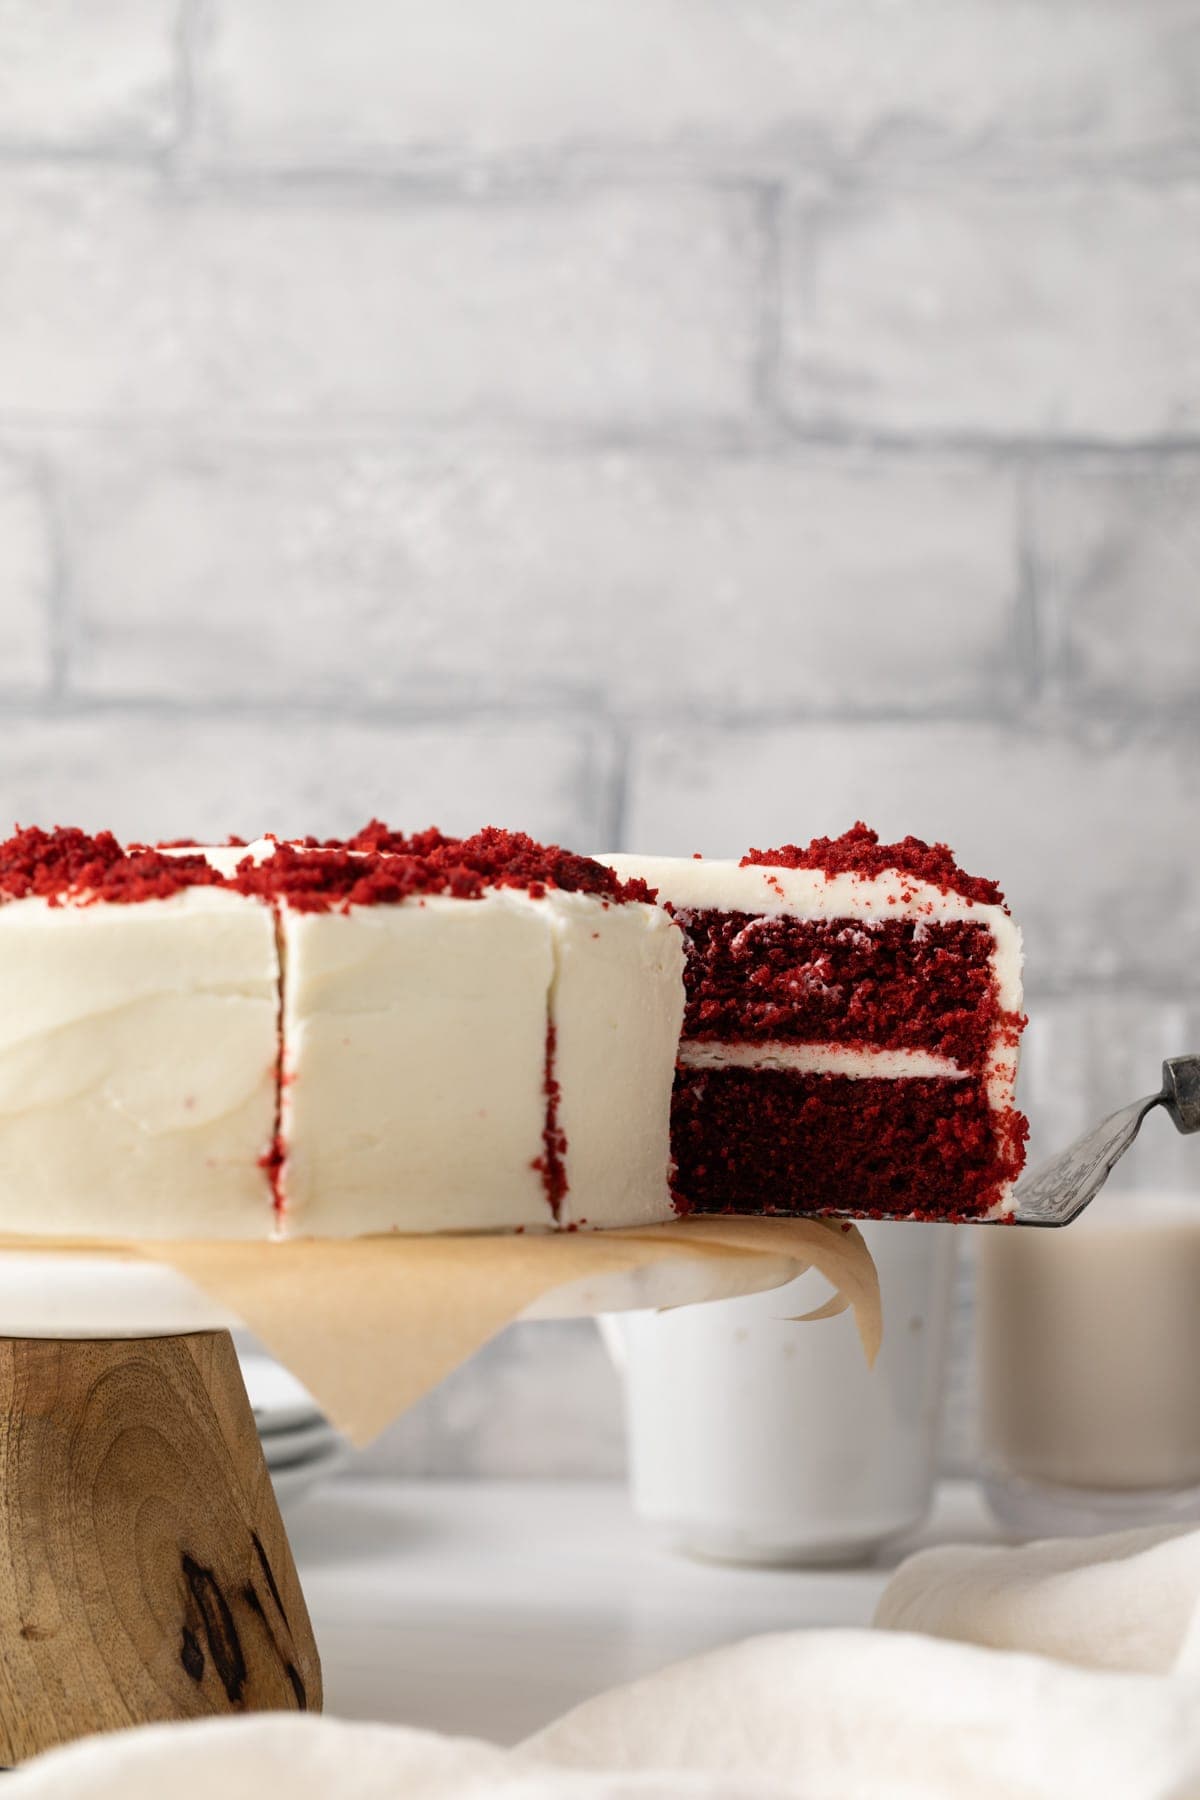 Slice being taken out of red velvet cake with cream cheese frosting.